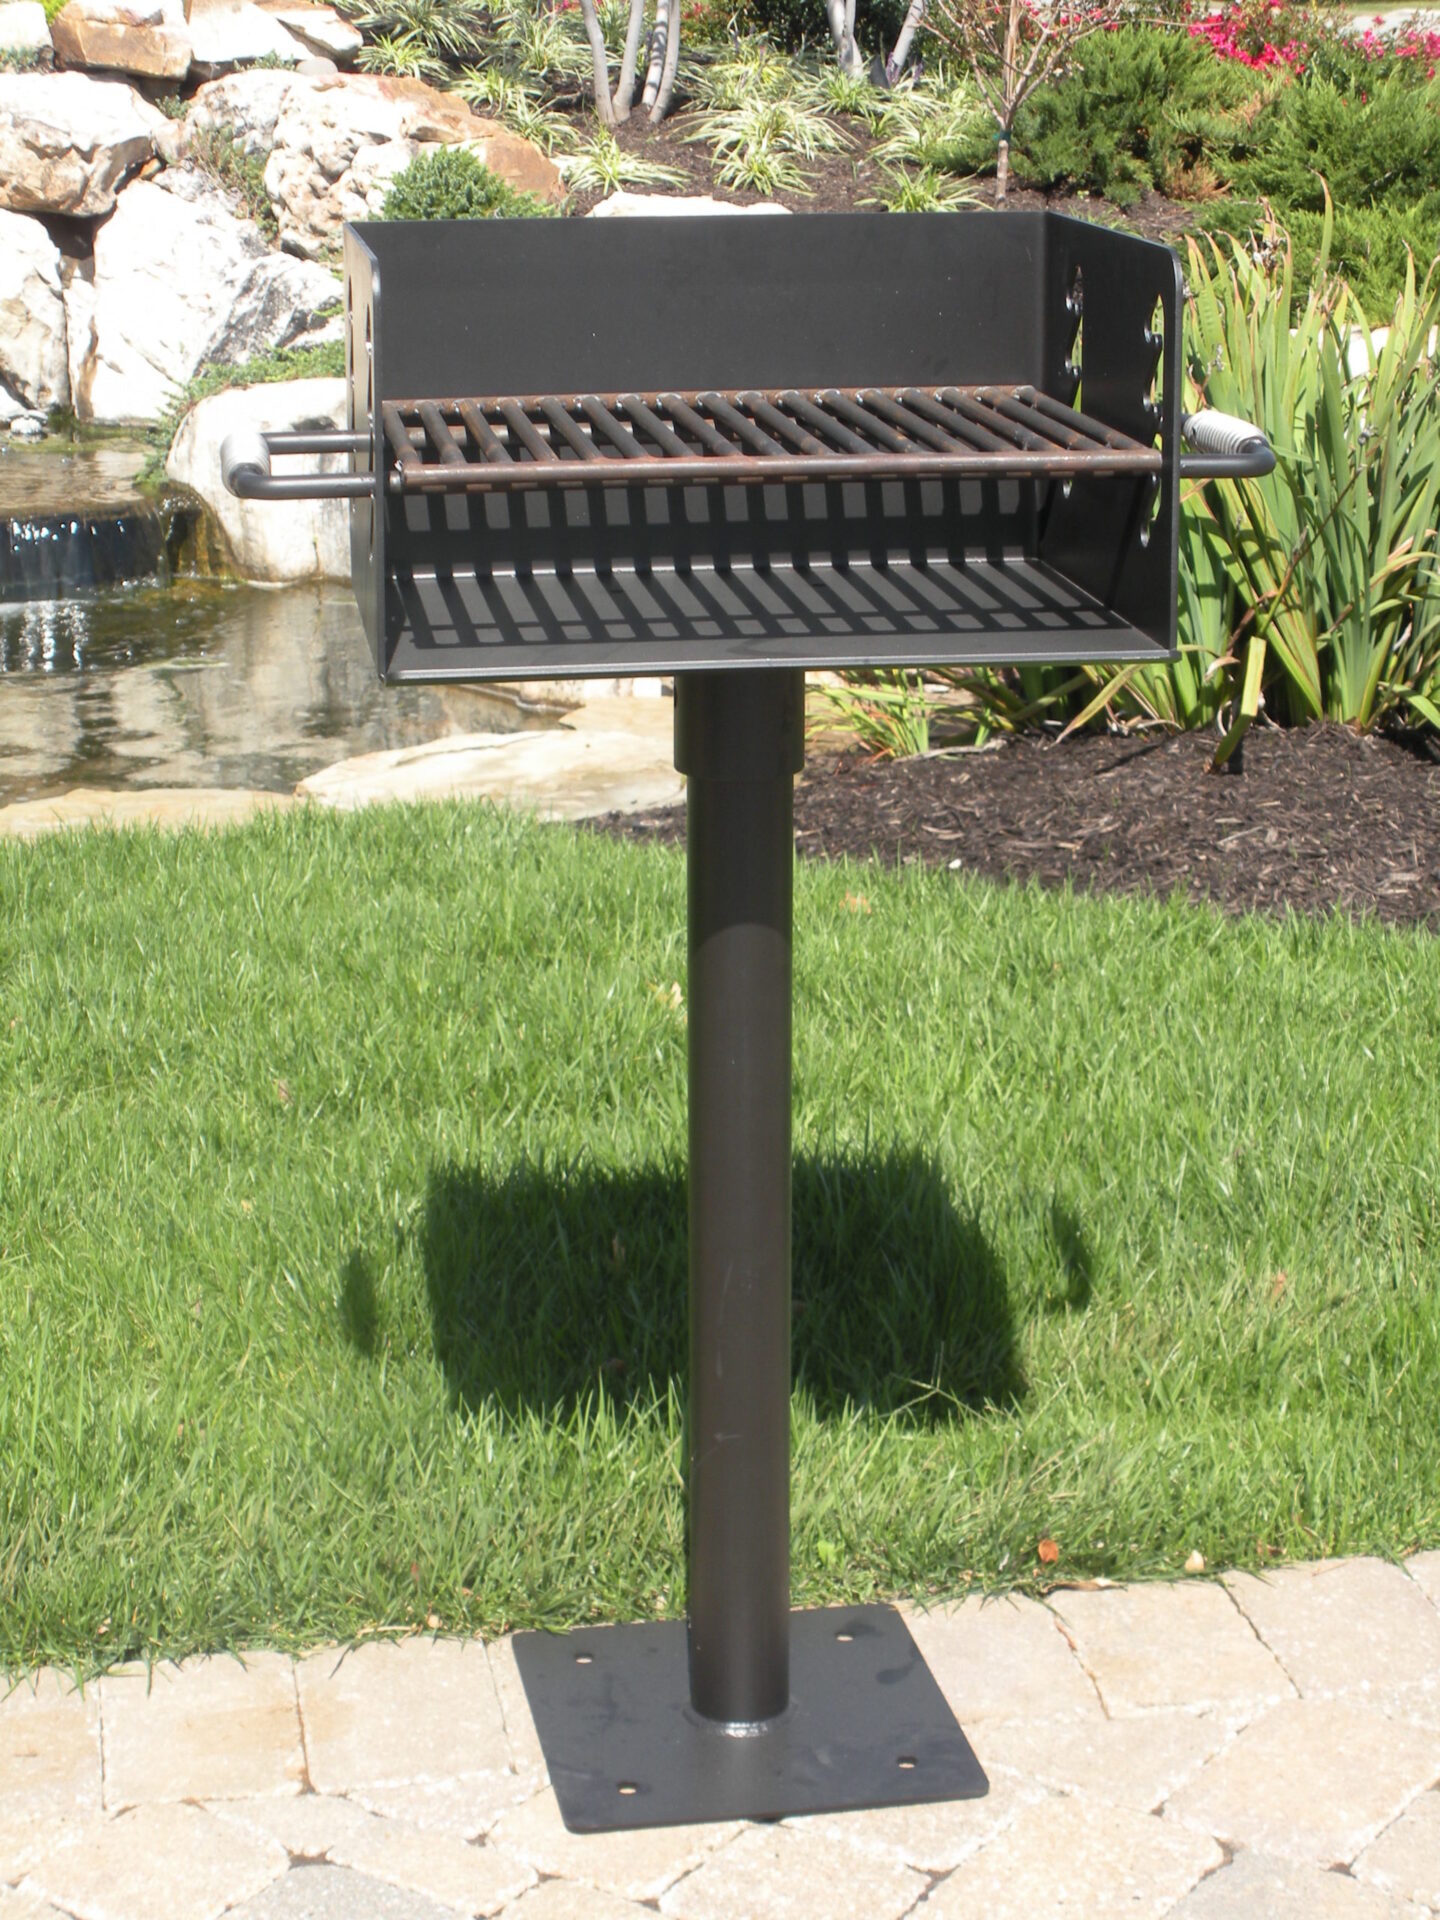 dynamisk argument web Park Grill - American Barbecue Systems